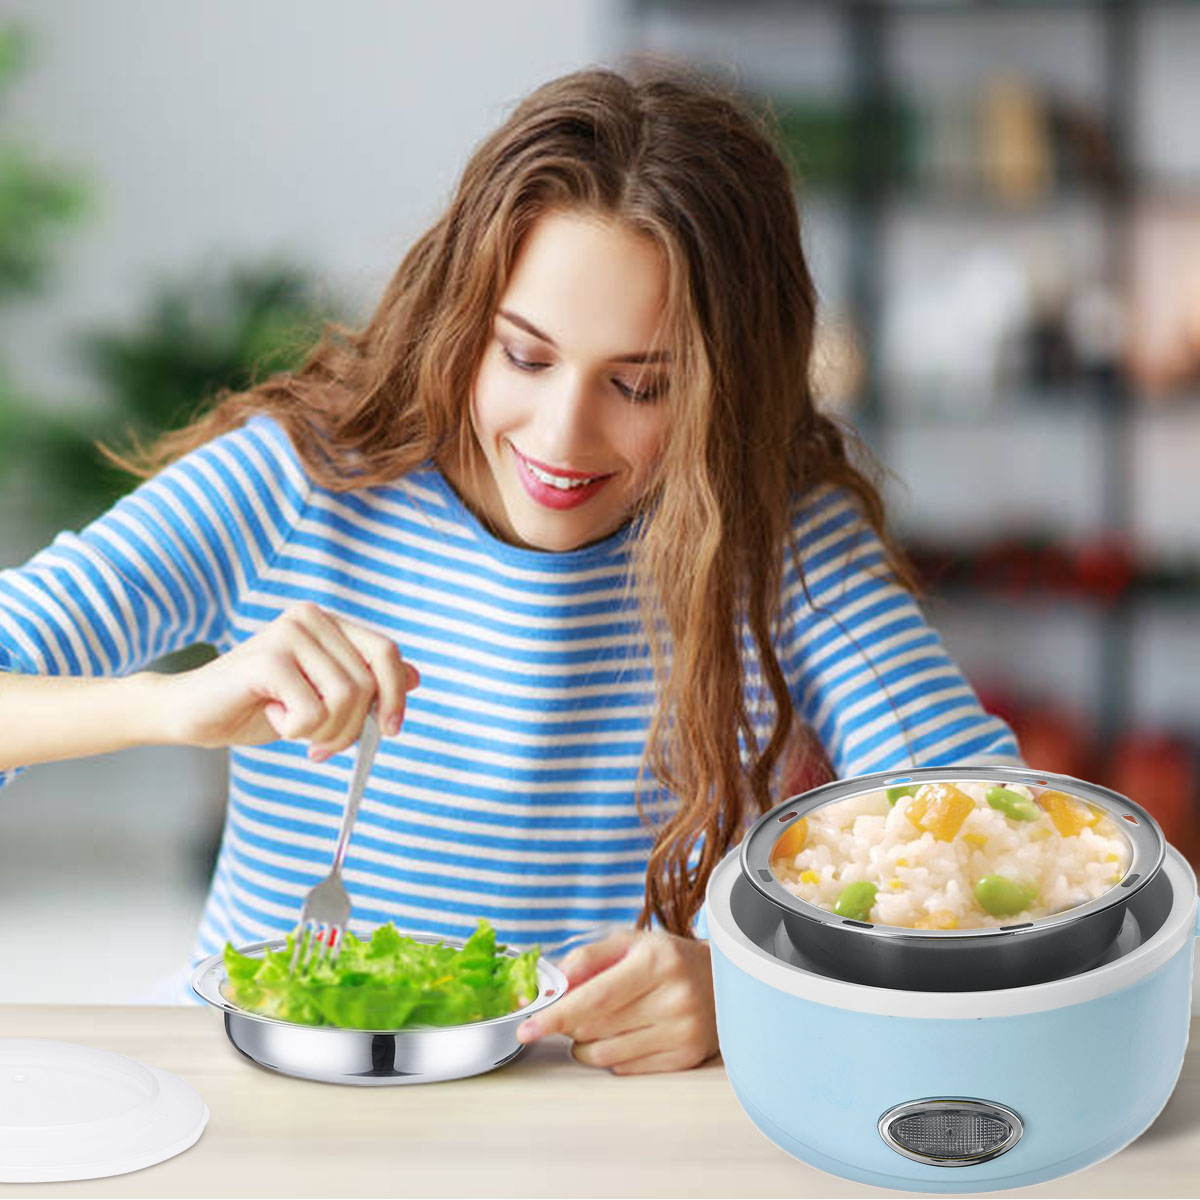 230W-13L-Portable-Electric-Stainless-Steel-Lunch-Bento-Box-Picnic-Bag-Heated-Food-Storage-Warmer-Hot-1661057-9